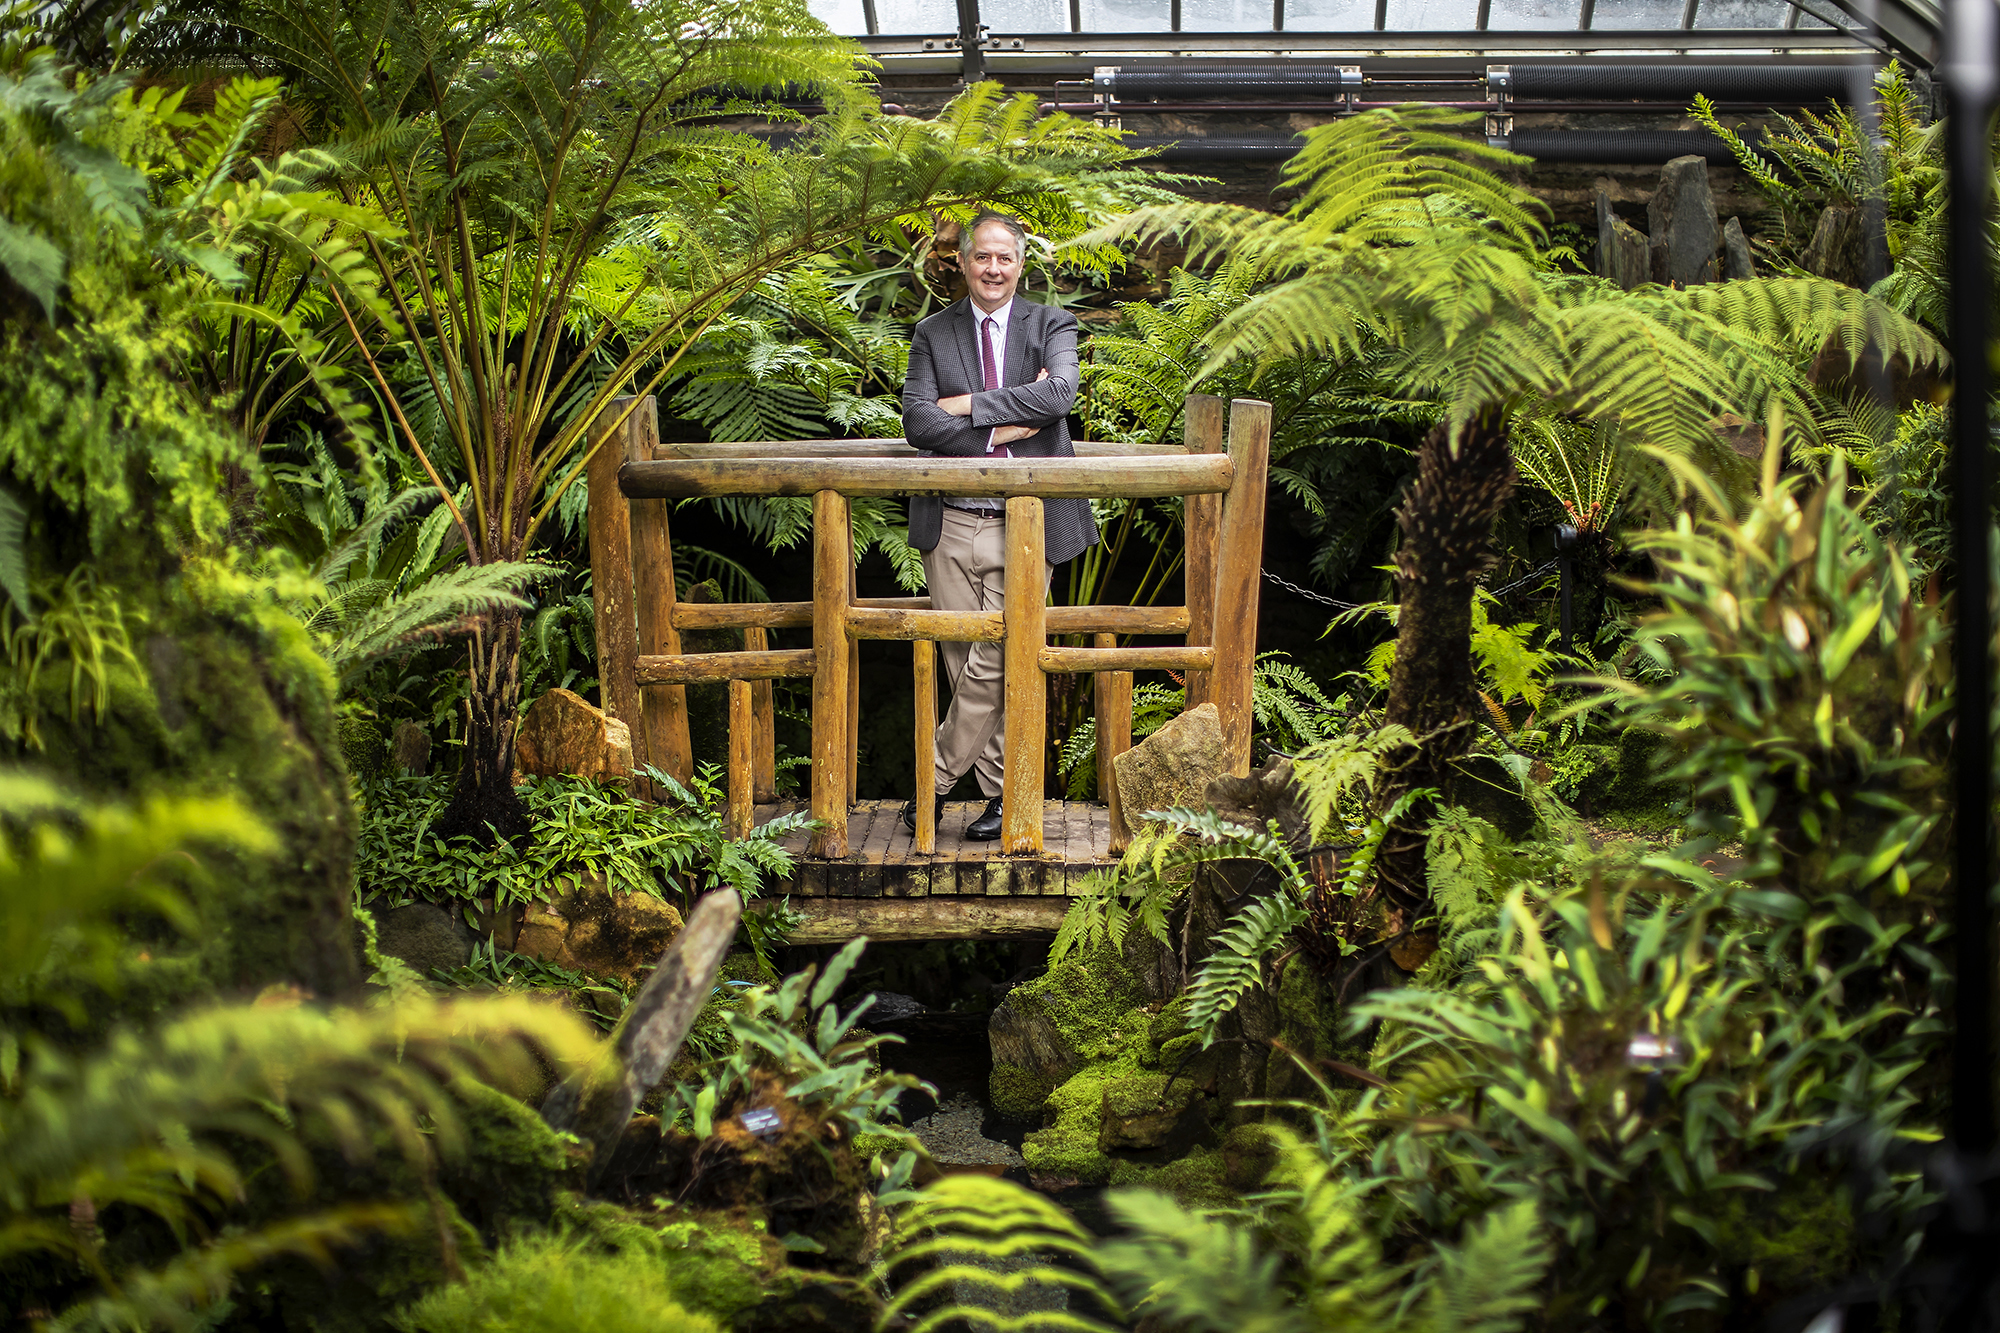 Bill Cullina stands on bridge surrounded by ferns